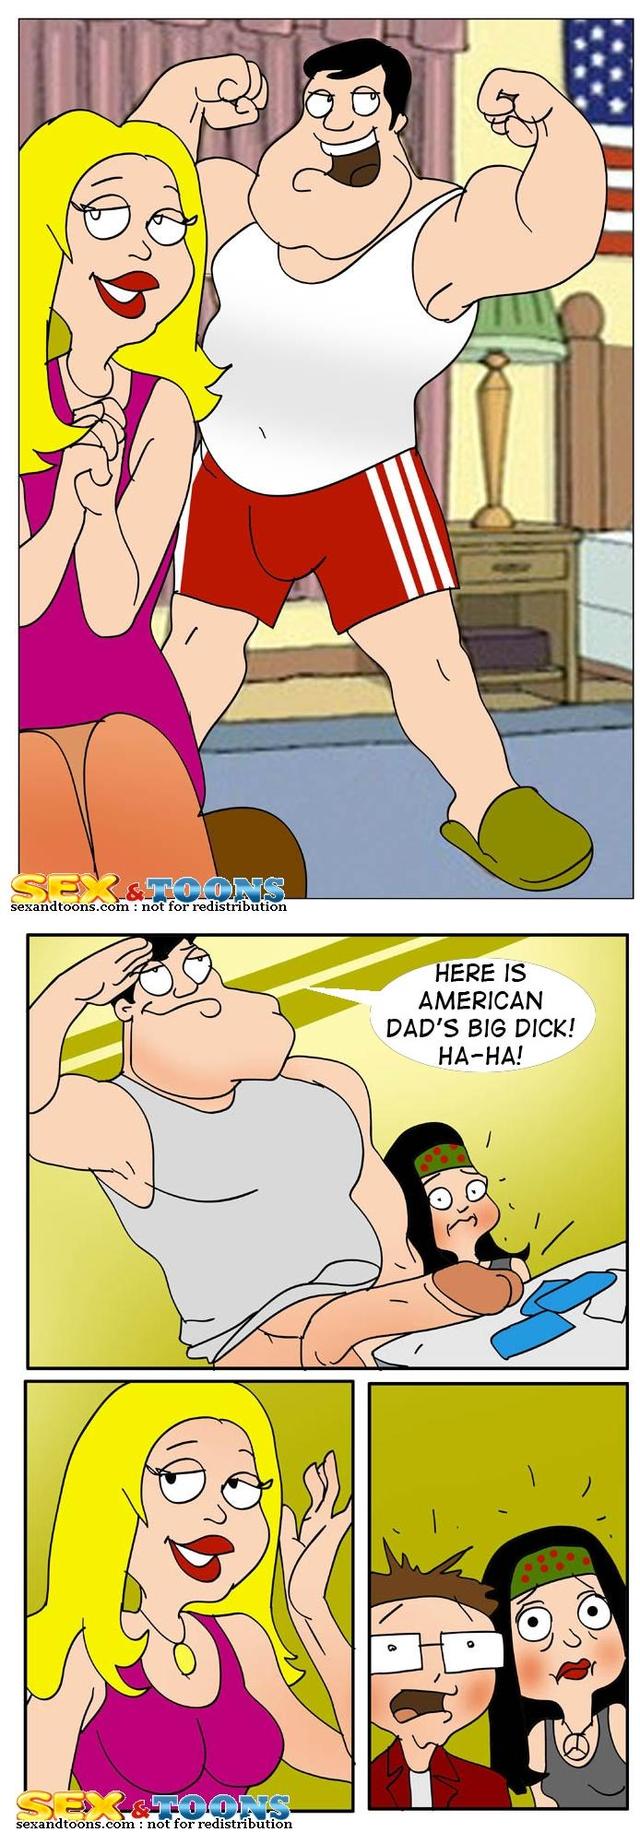 sex pictures toons media toon american dad